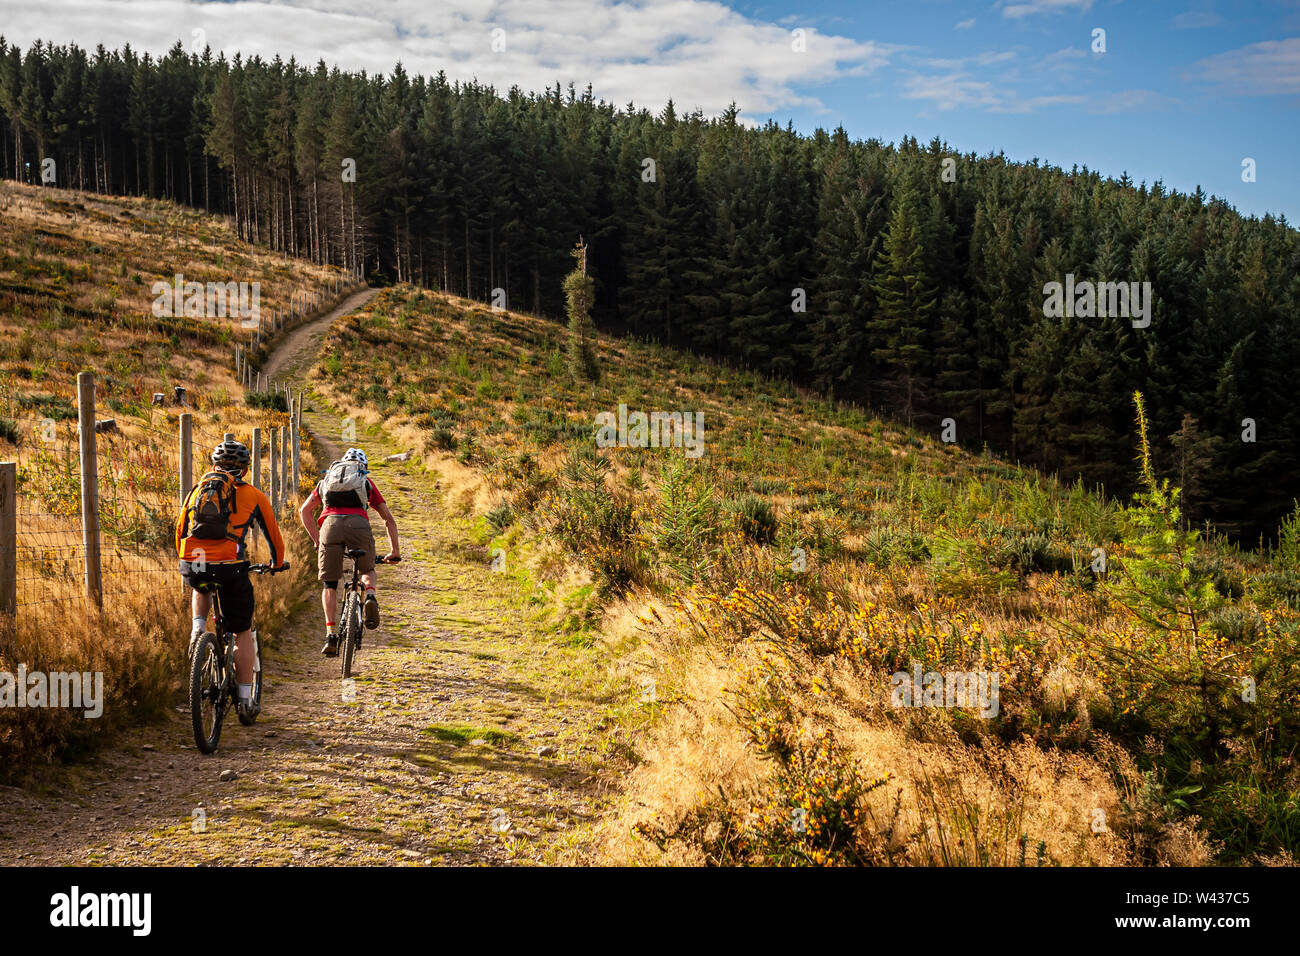 Two mountain biker riding an easy trail towards the forest in the purpose built MTB trail centre. Stock Photo